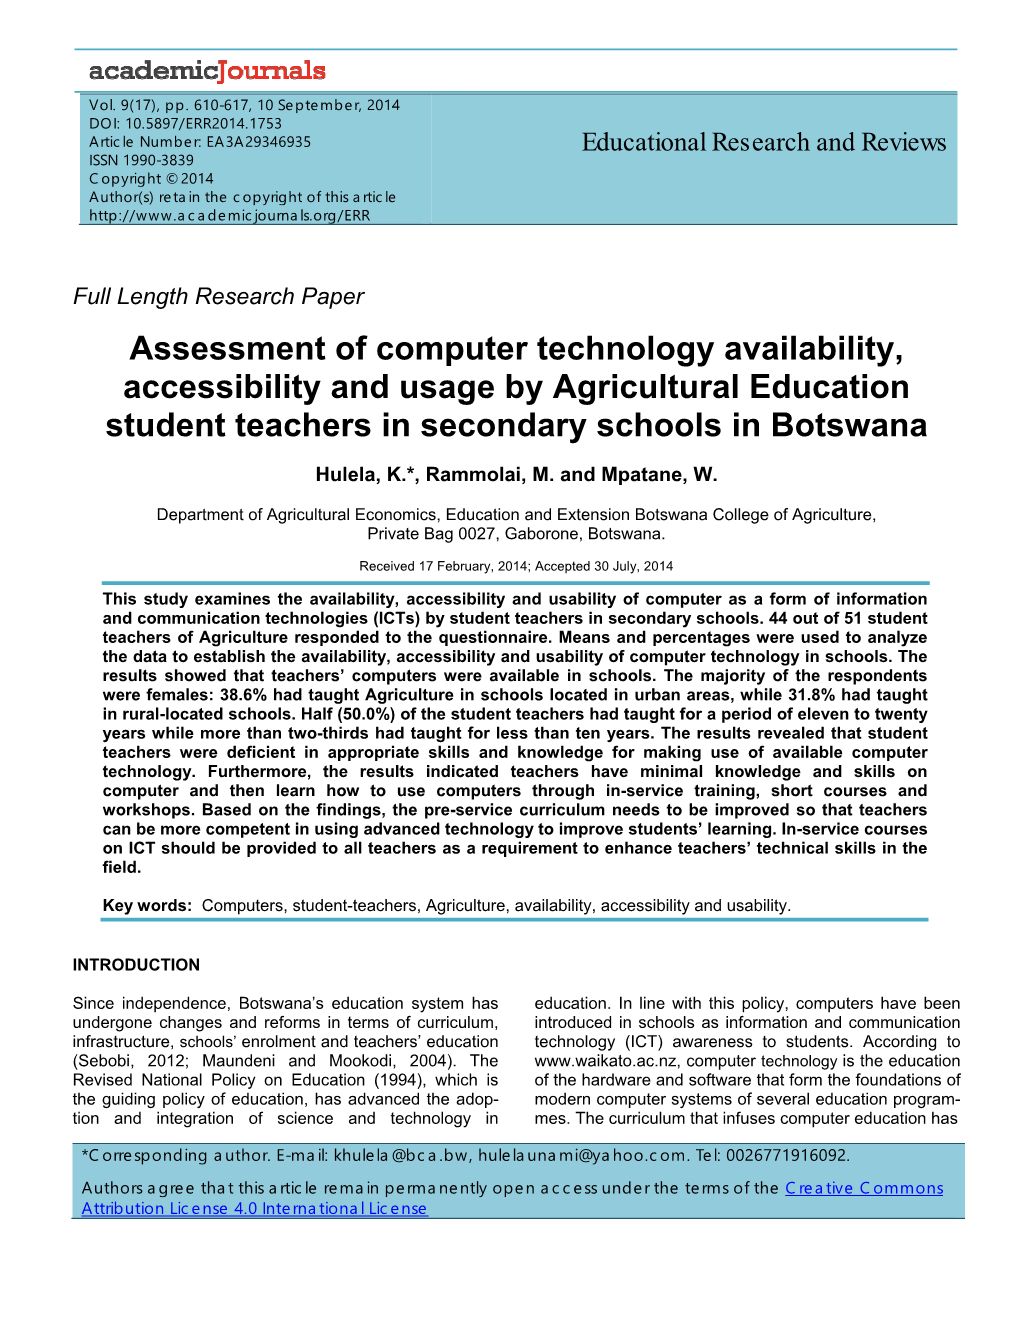 Assessment of Computer Technology Availability, Accessibility and Usage by Agricultural Education Student Teachers in Secondary Schools in Botswana